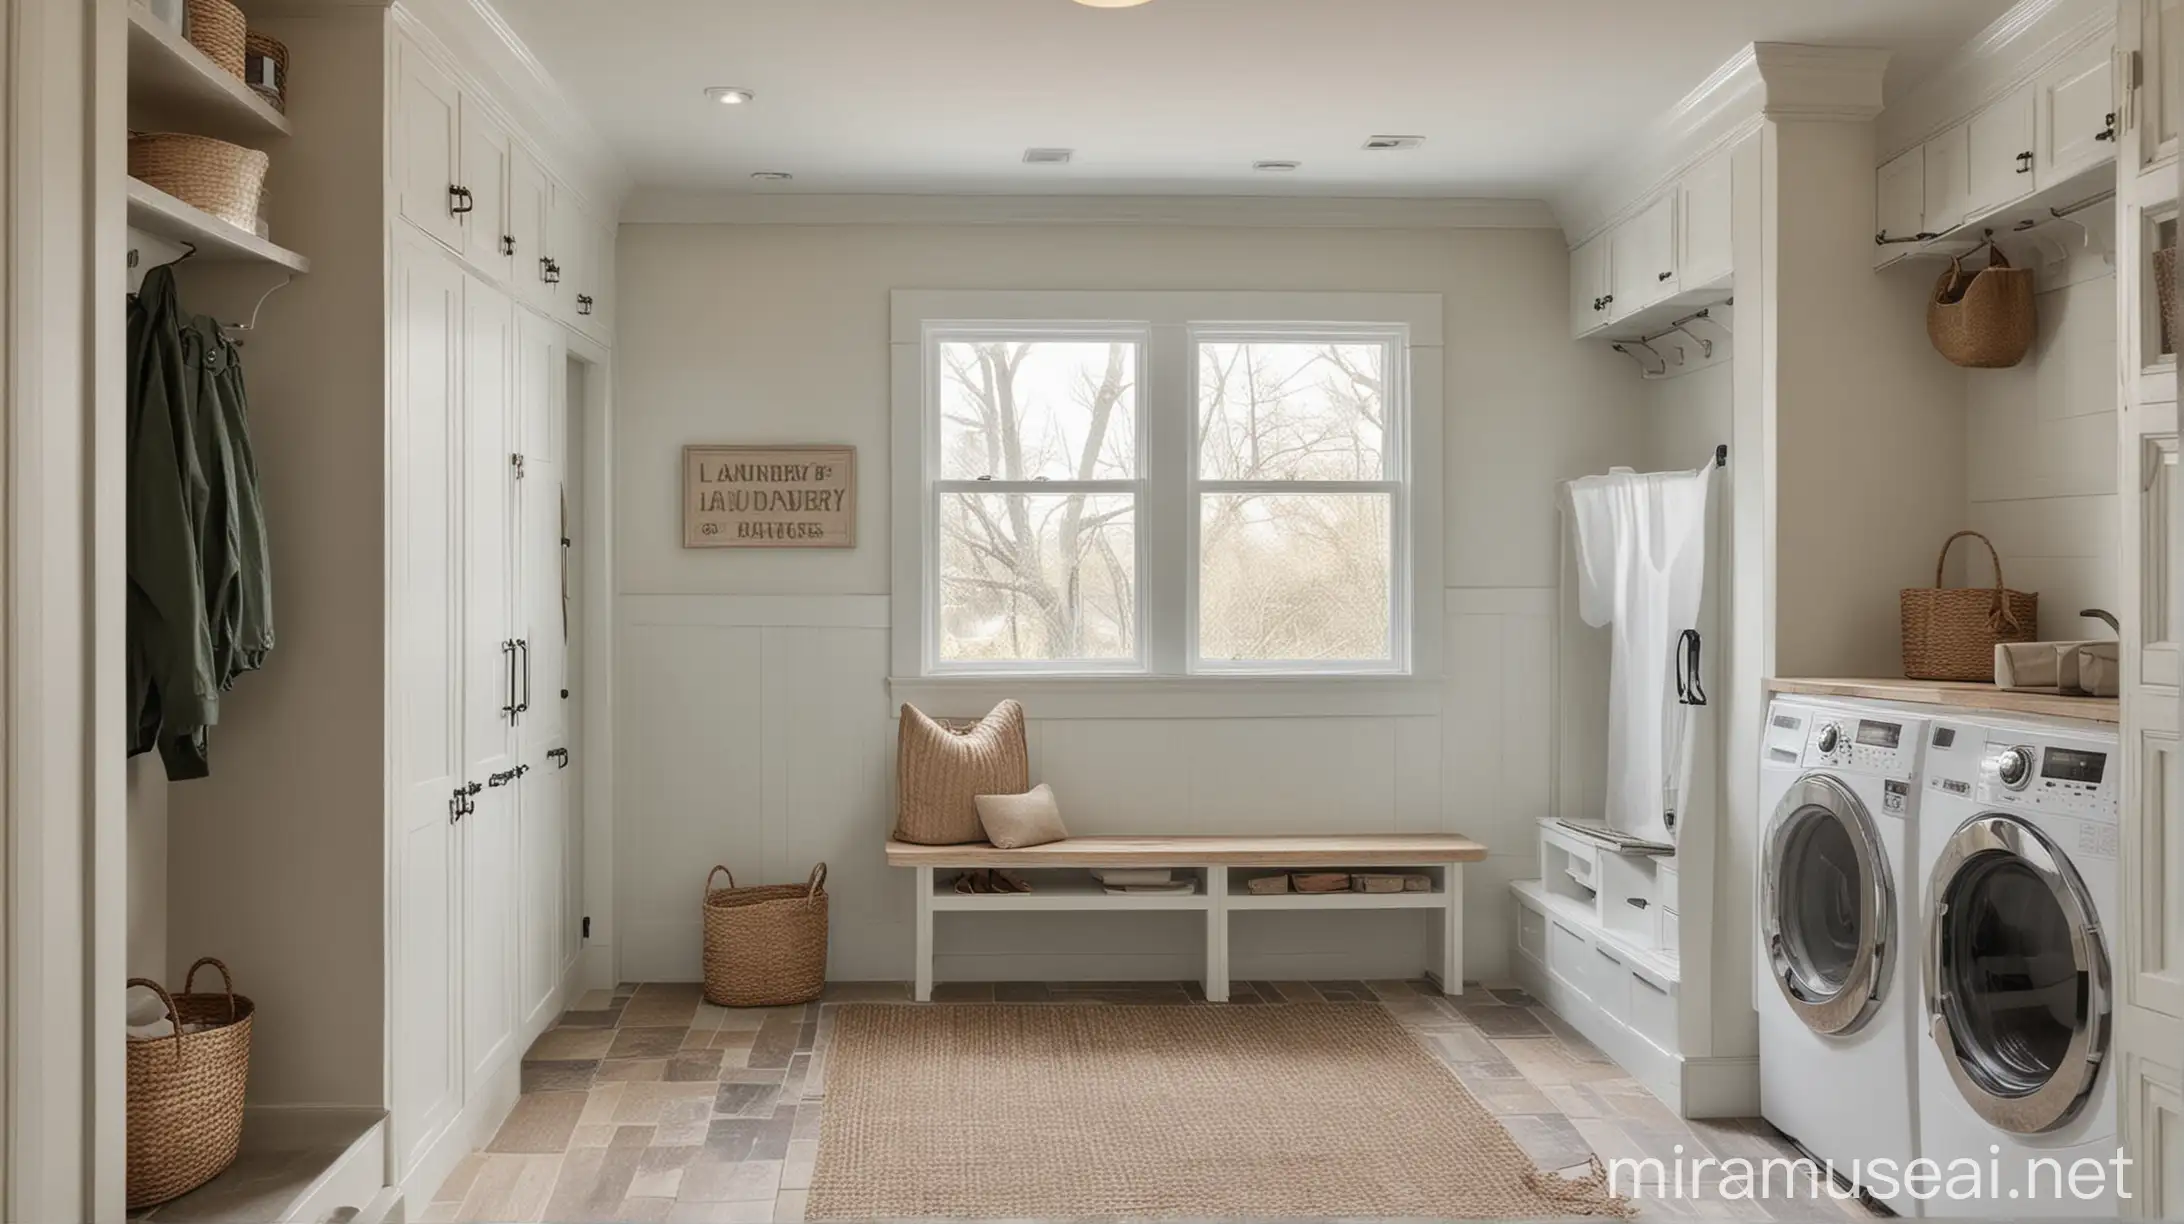 A mudroom combined with a laundry room for added convenience.